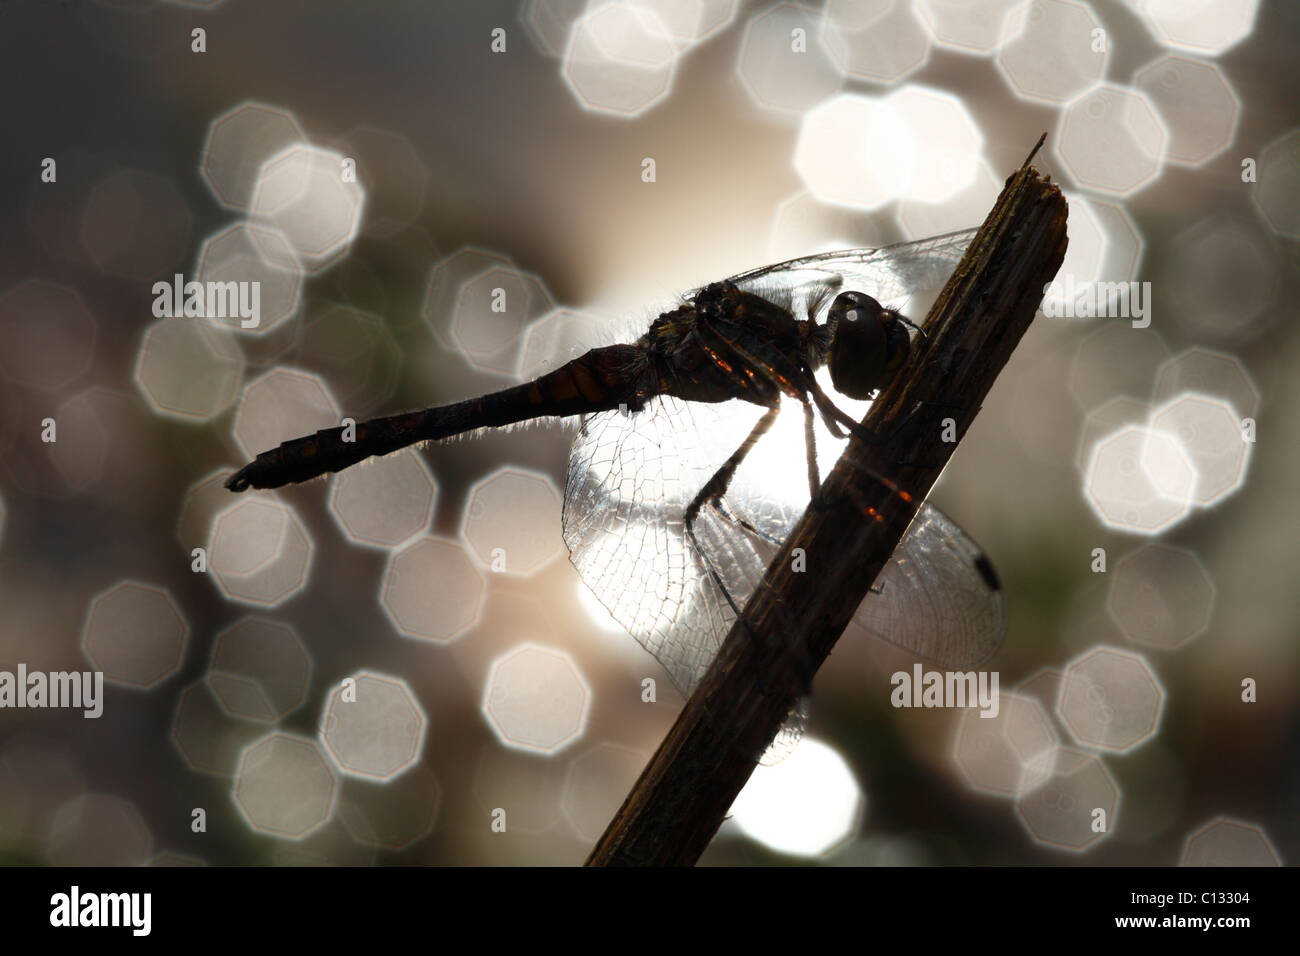 Male Black Darter Dragonfly (Sympetrum danae) on a territorial perch beside a pond. Powys, Wales, UK. Stock Photo